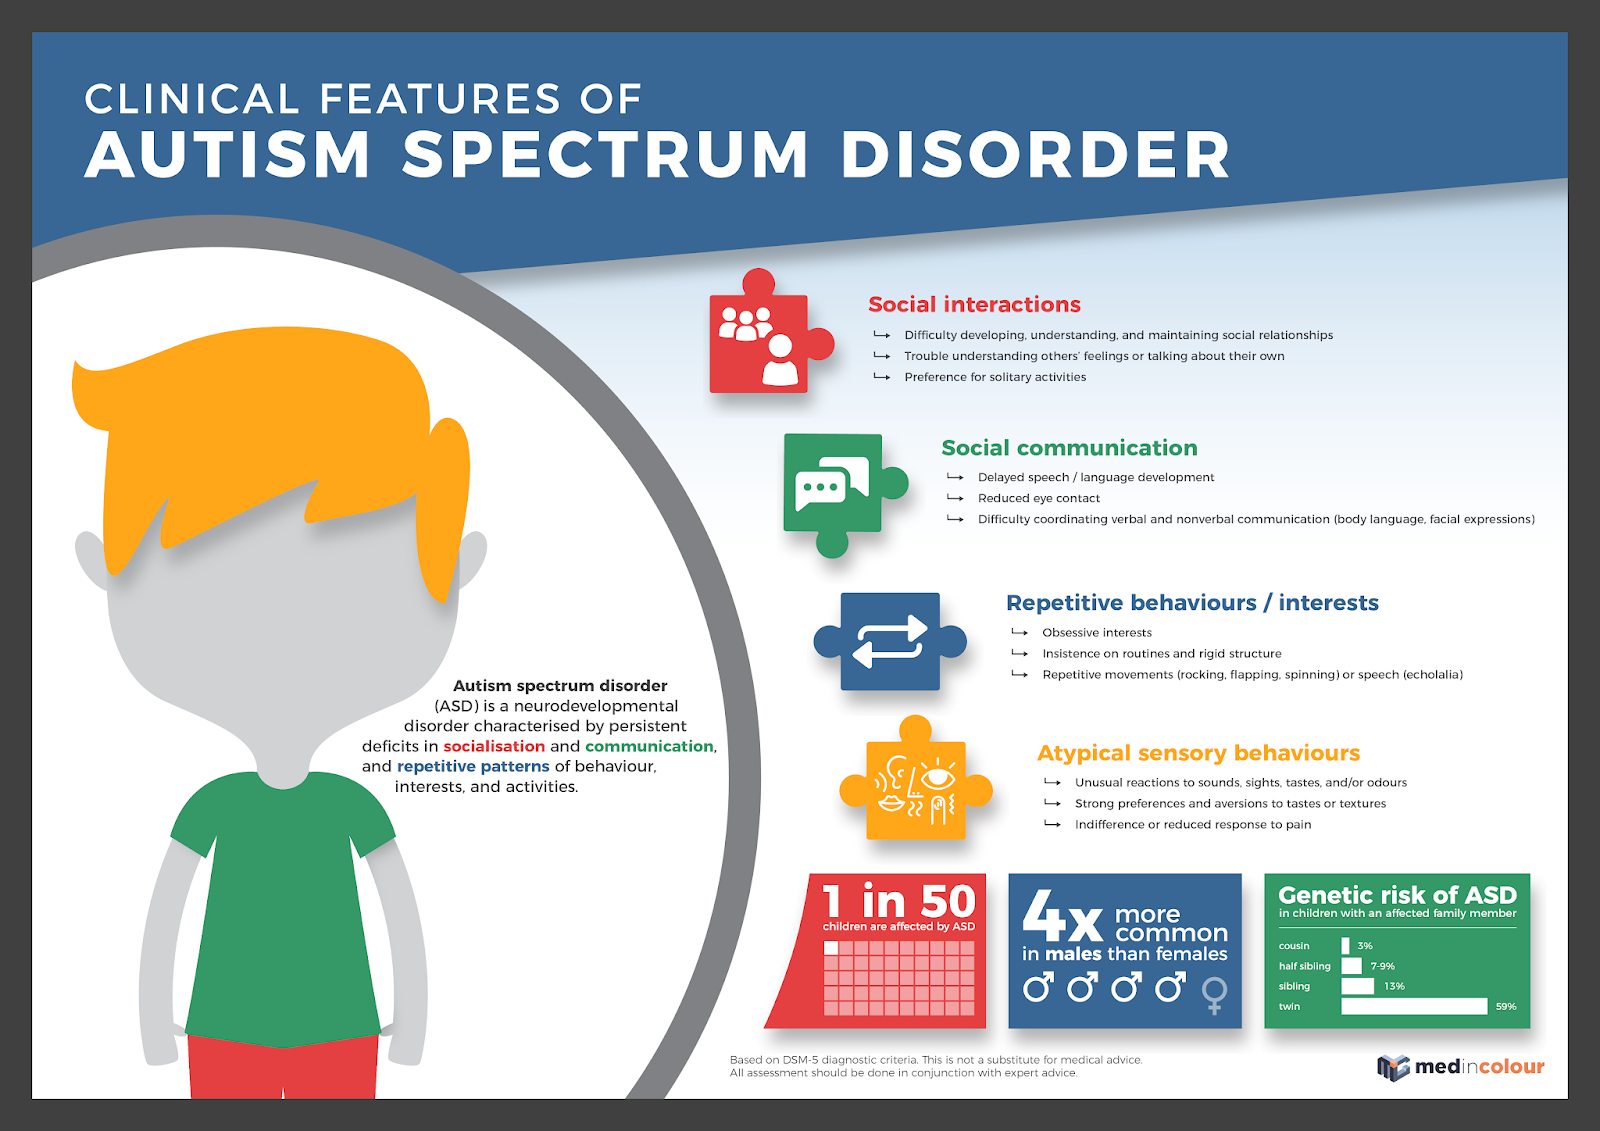 research on biological treatments for autism spectrum disorder shows that